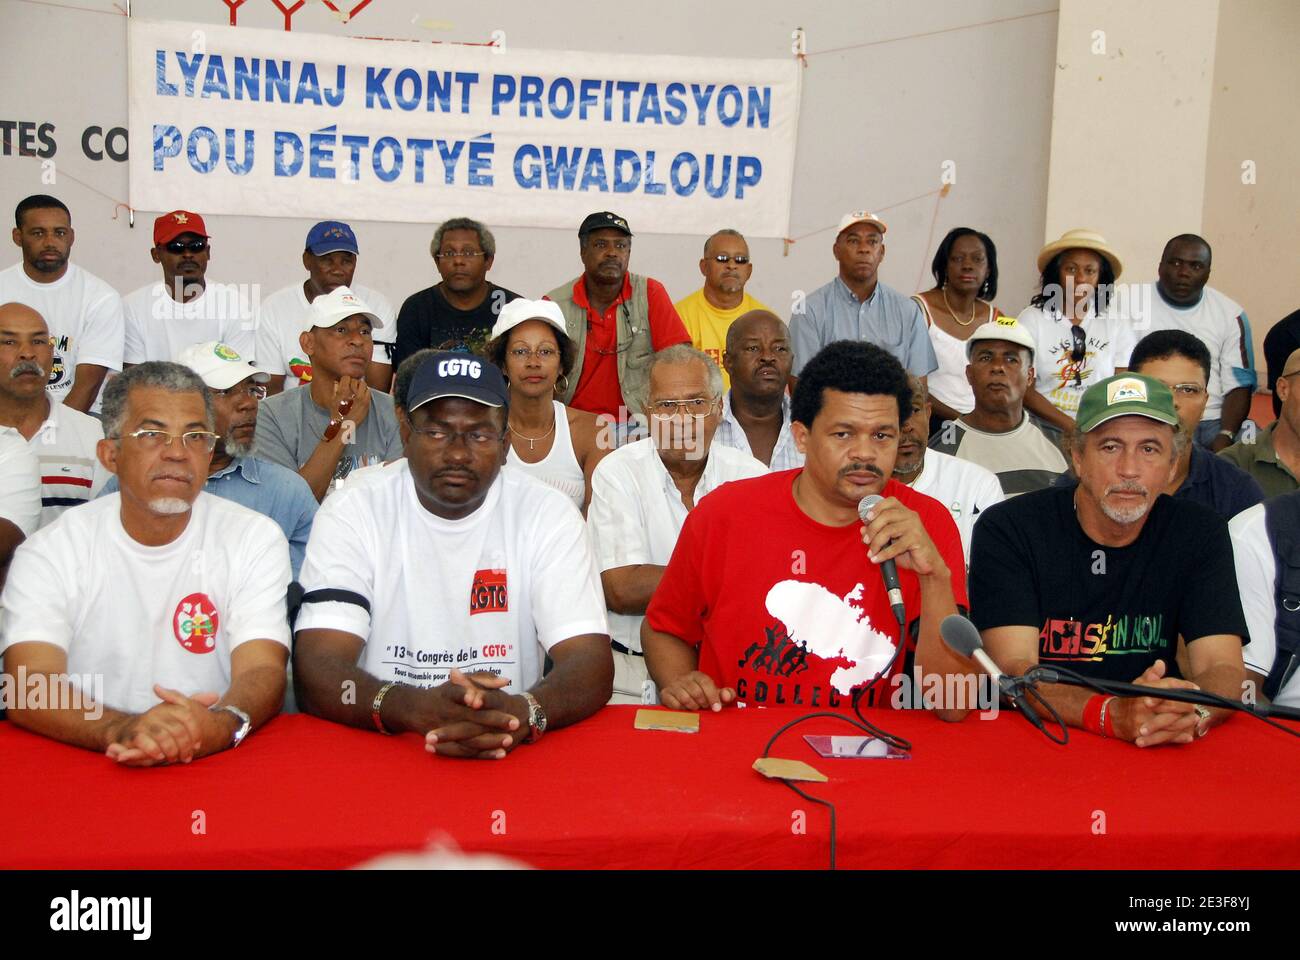 The Collective Against Exploitation (LKP) leader Elie Domota flanked by Alain Plaisir, CTU, Jean-Marie Nomertin CGTG, Rene Beauchamp SPEG during a press conference in Pointe-a-Pitre, Guadeloupe, France on February 19, 2009. Photo by Bernard Boucard/Mediaclic/ABACAPRESS.COM Stock Photo